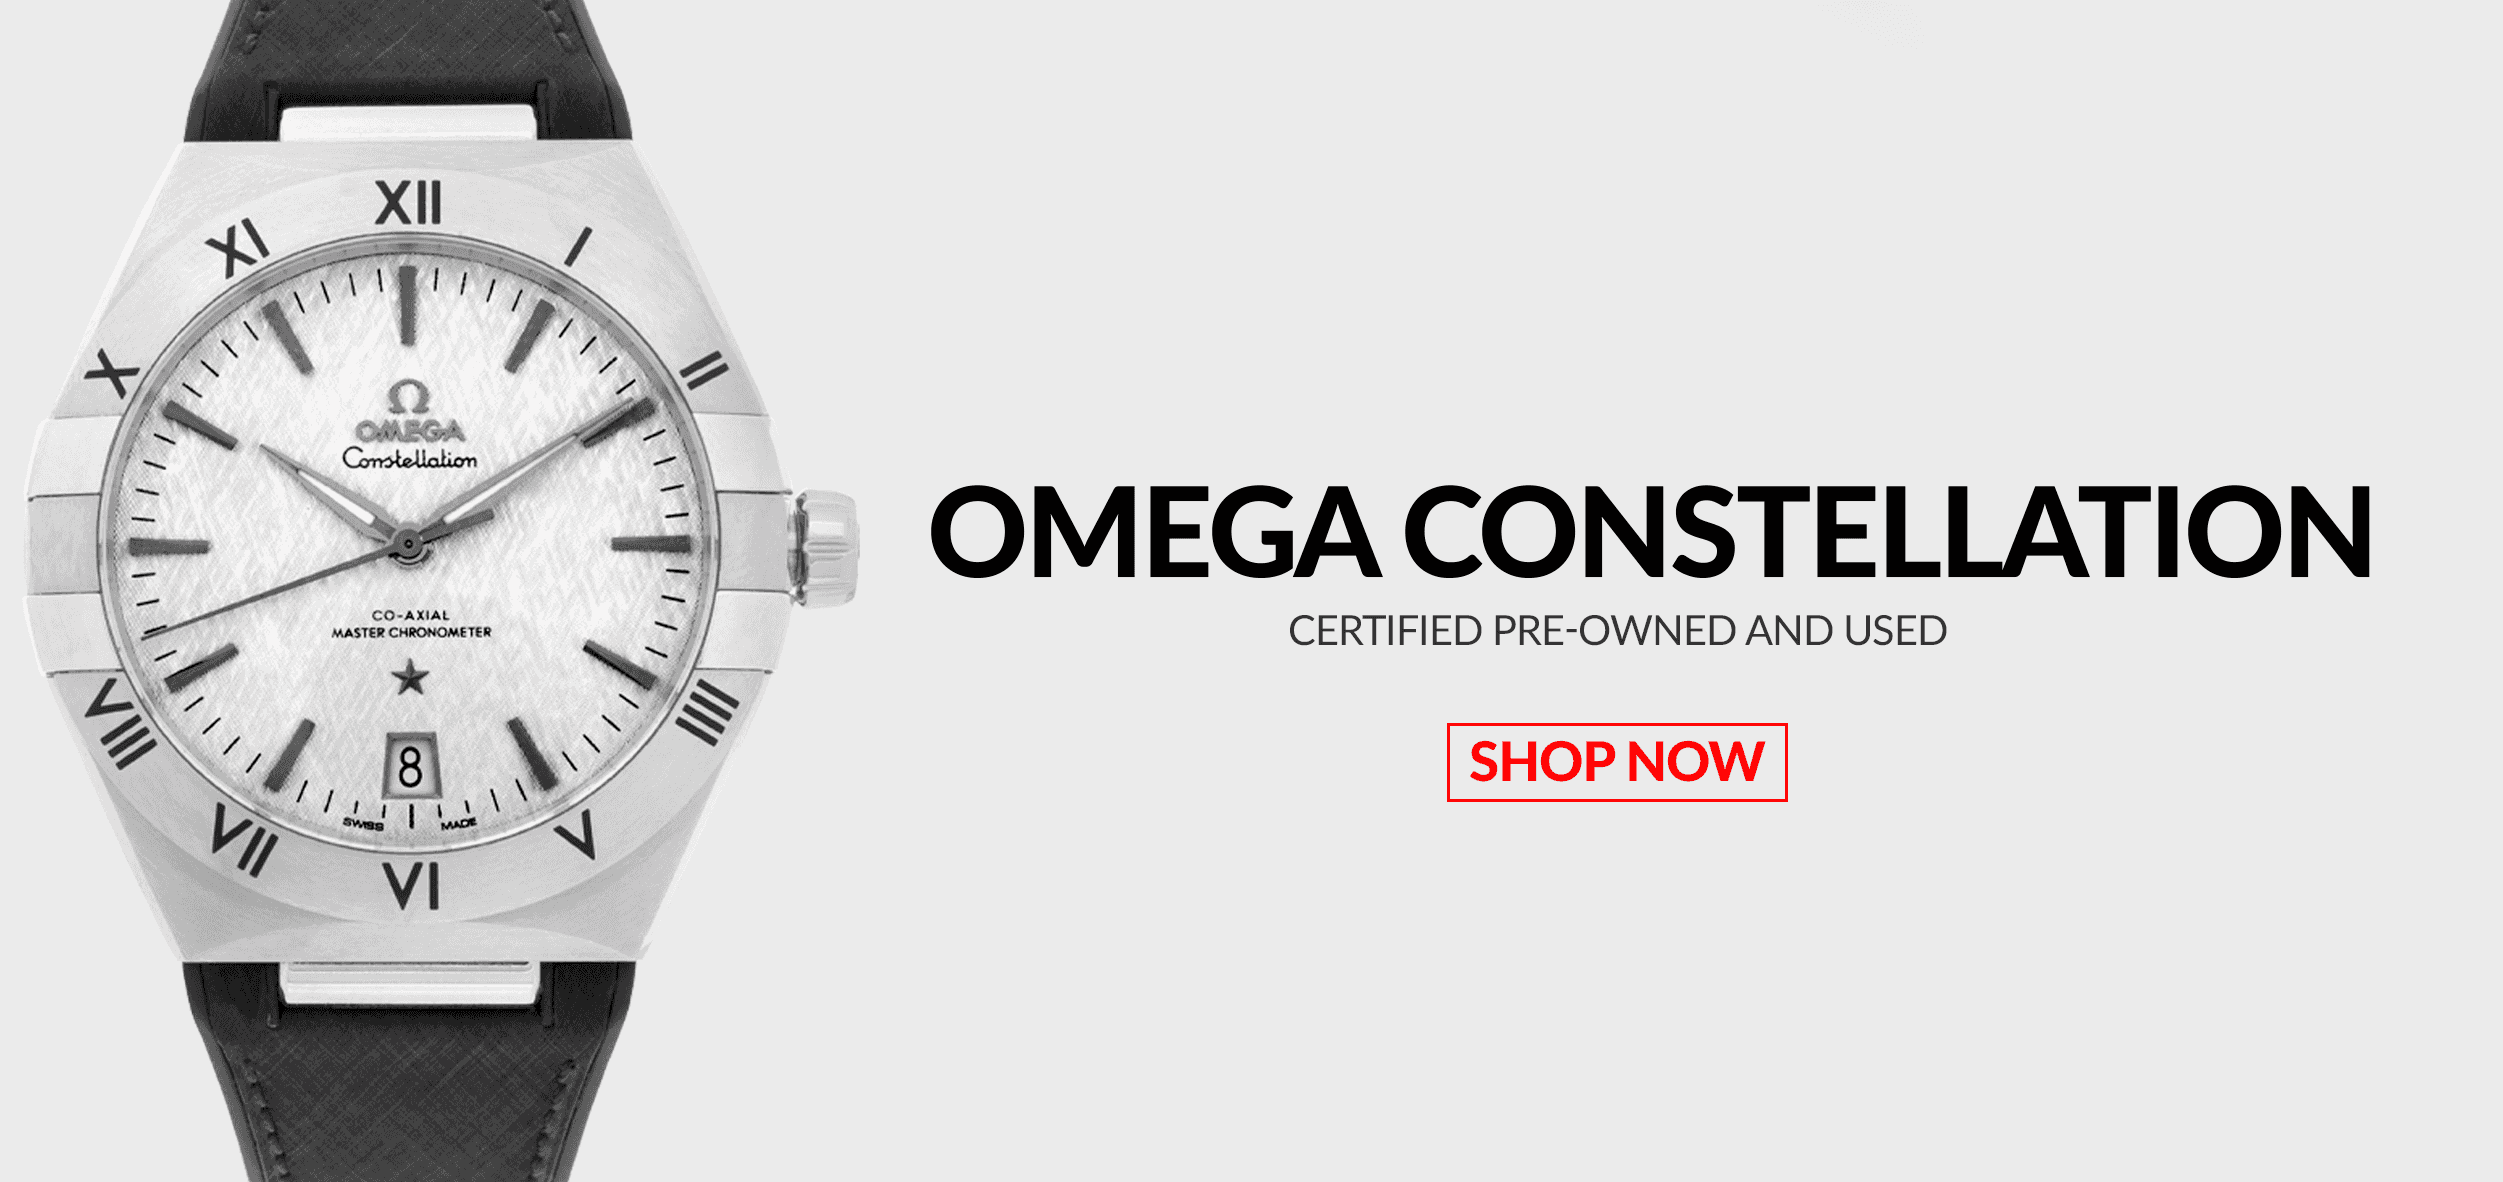 Pre-Owned Certified Used Omega Constellation Watches Header